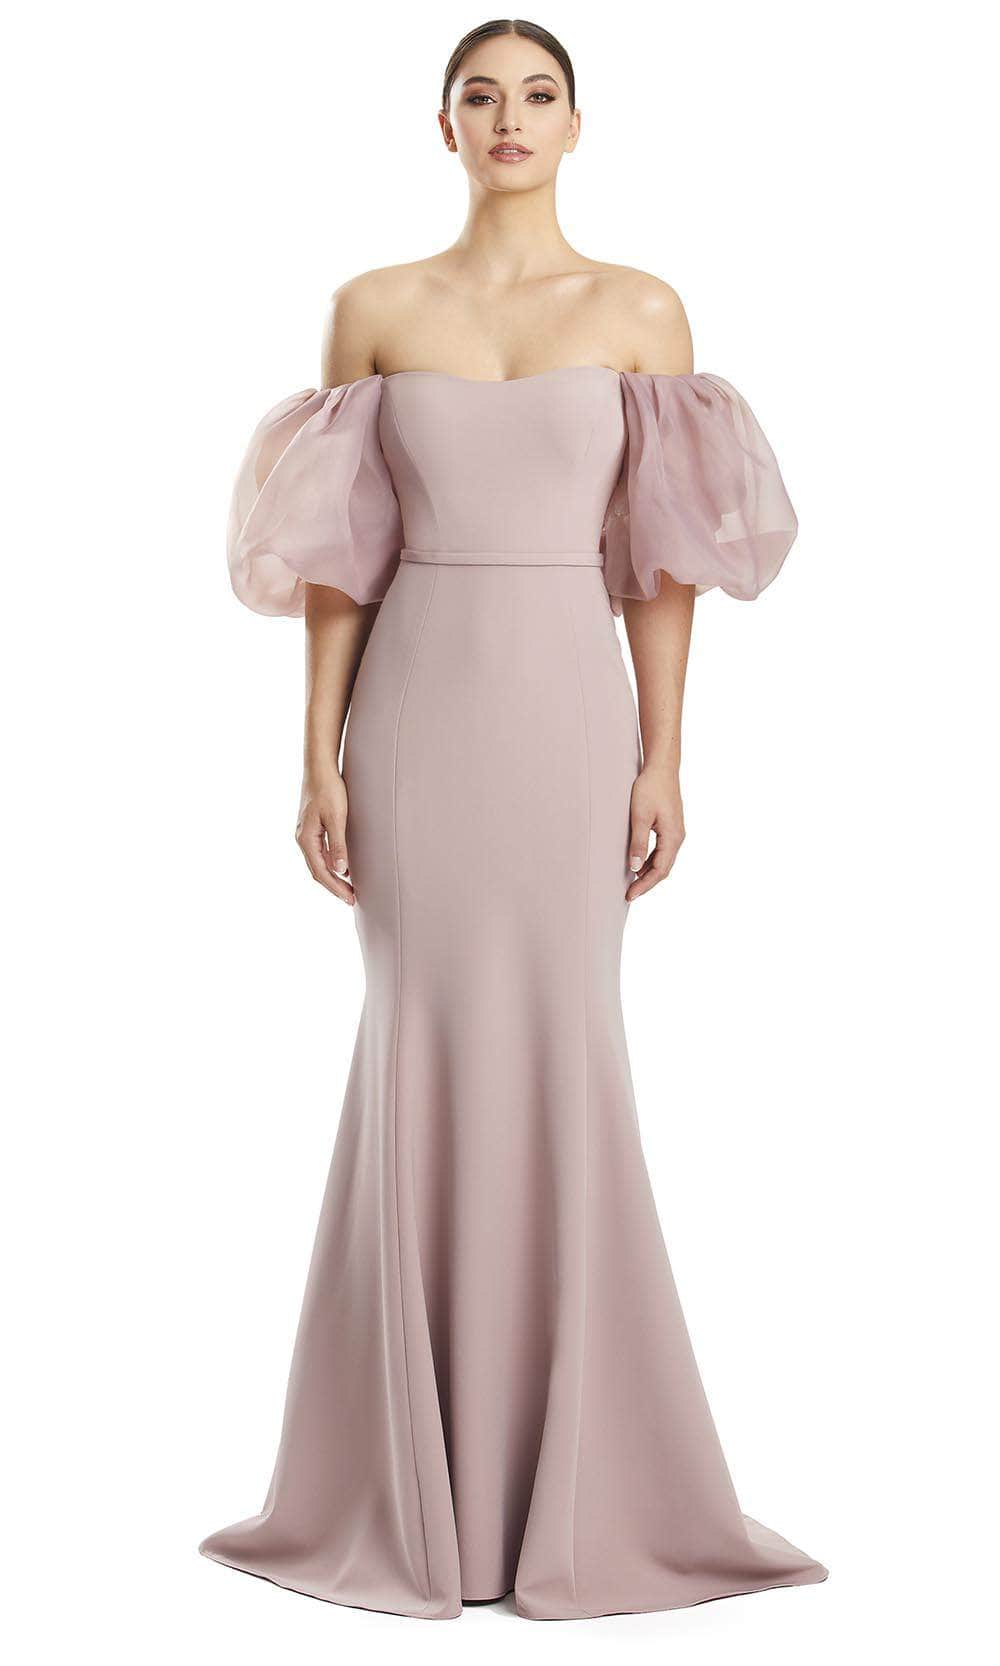 Alexander by Daymor 1870F23 - Puff Sleeve Trumpet Evening Gown